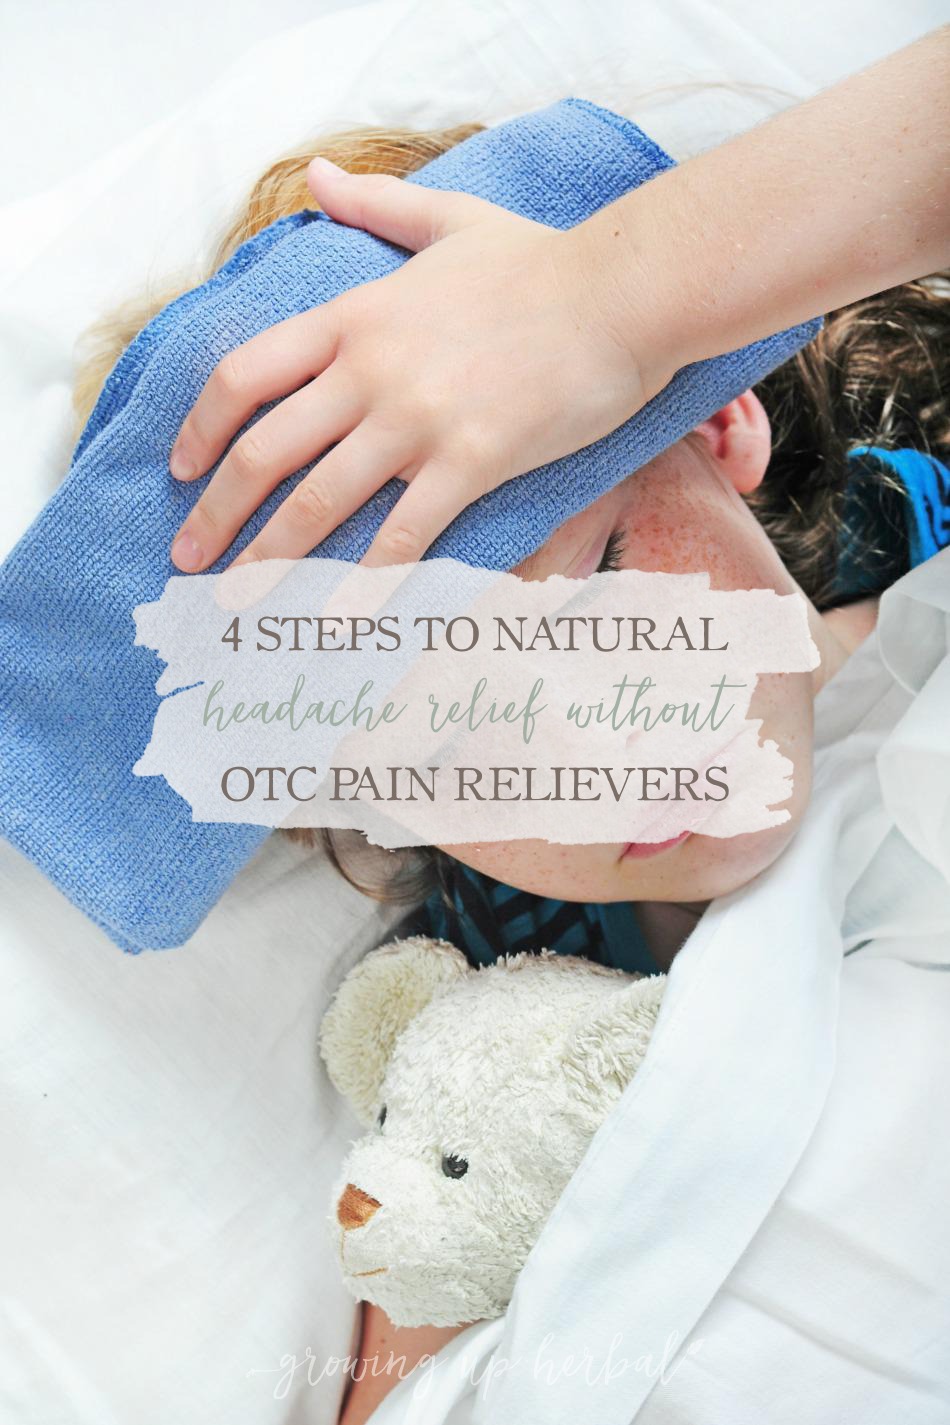 4 Steps To Natural Headache Relief Without OTC Pain Relievers | Growing Up Herbal | OTC pain relievers don't have to be your first choice when it comes to dealing with headaches. Here are 4 natural methods that can help!